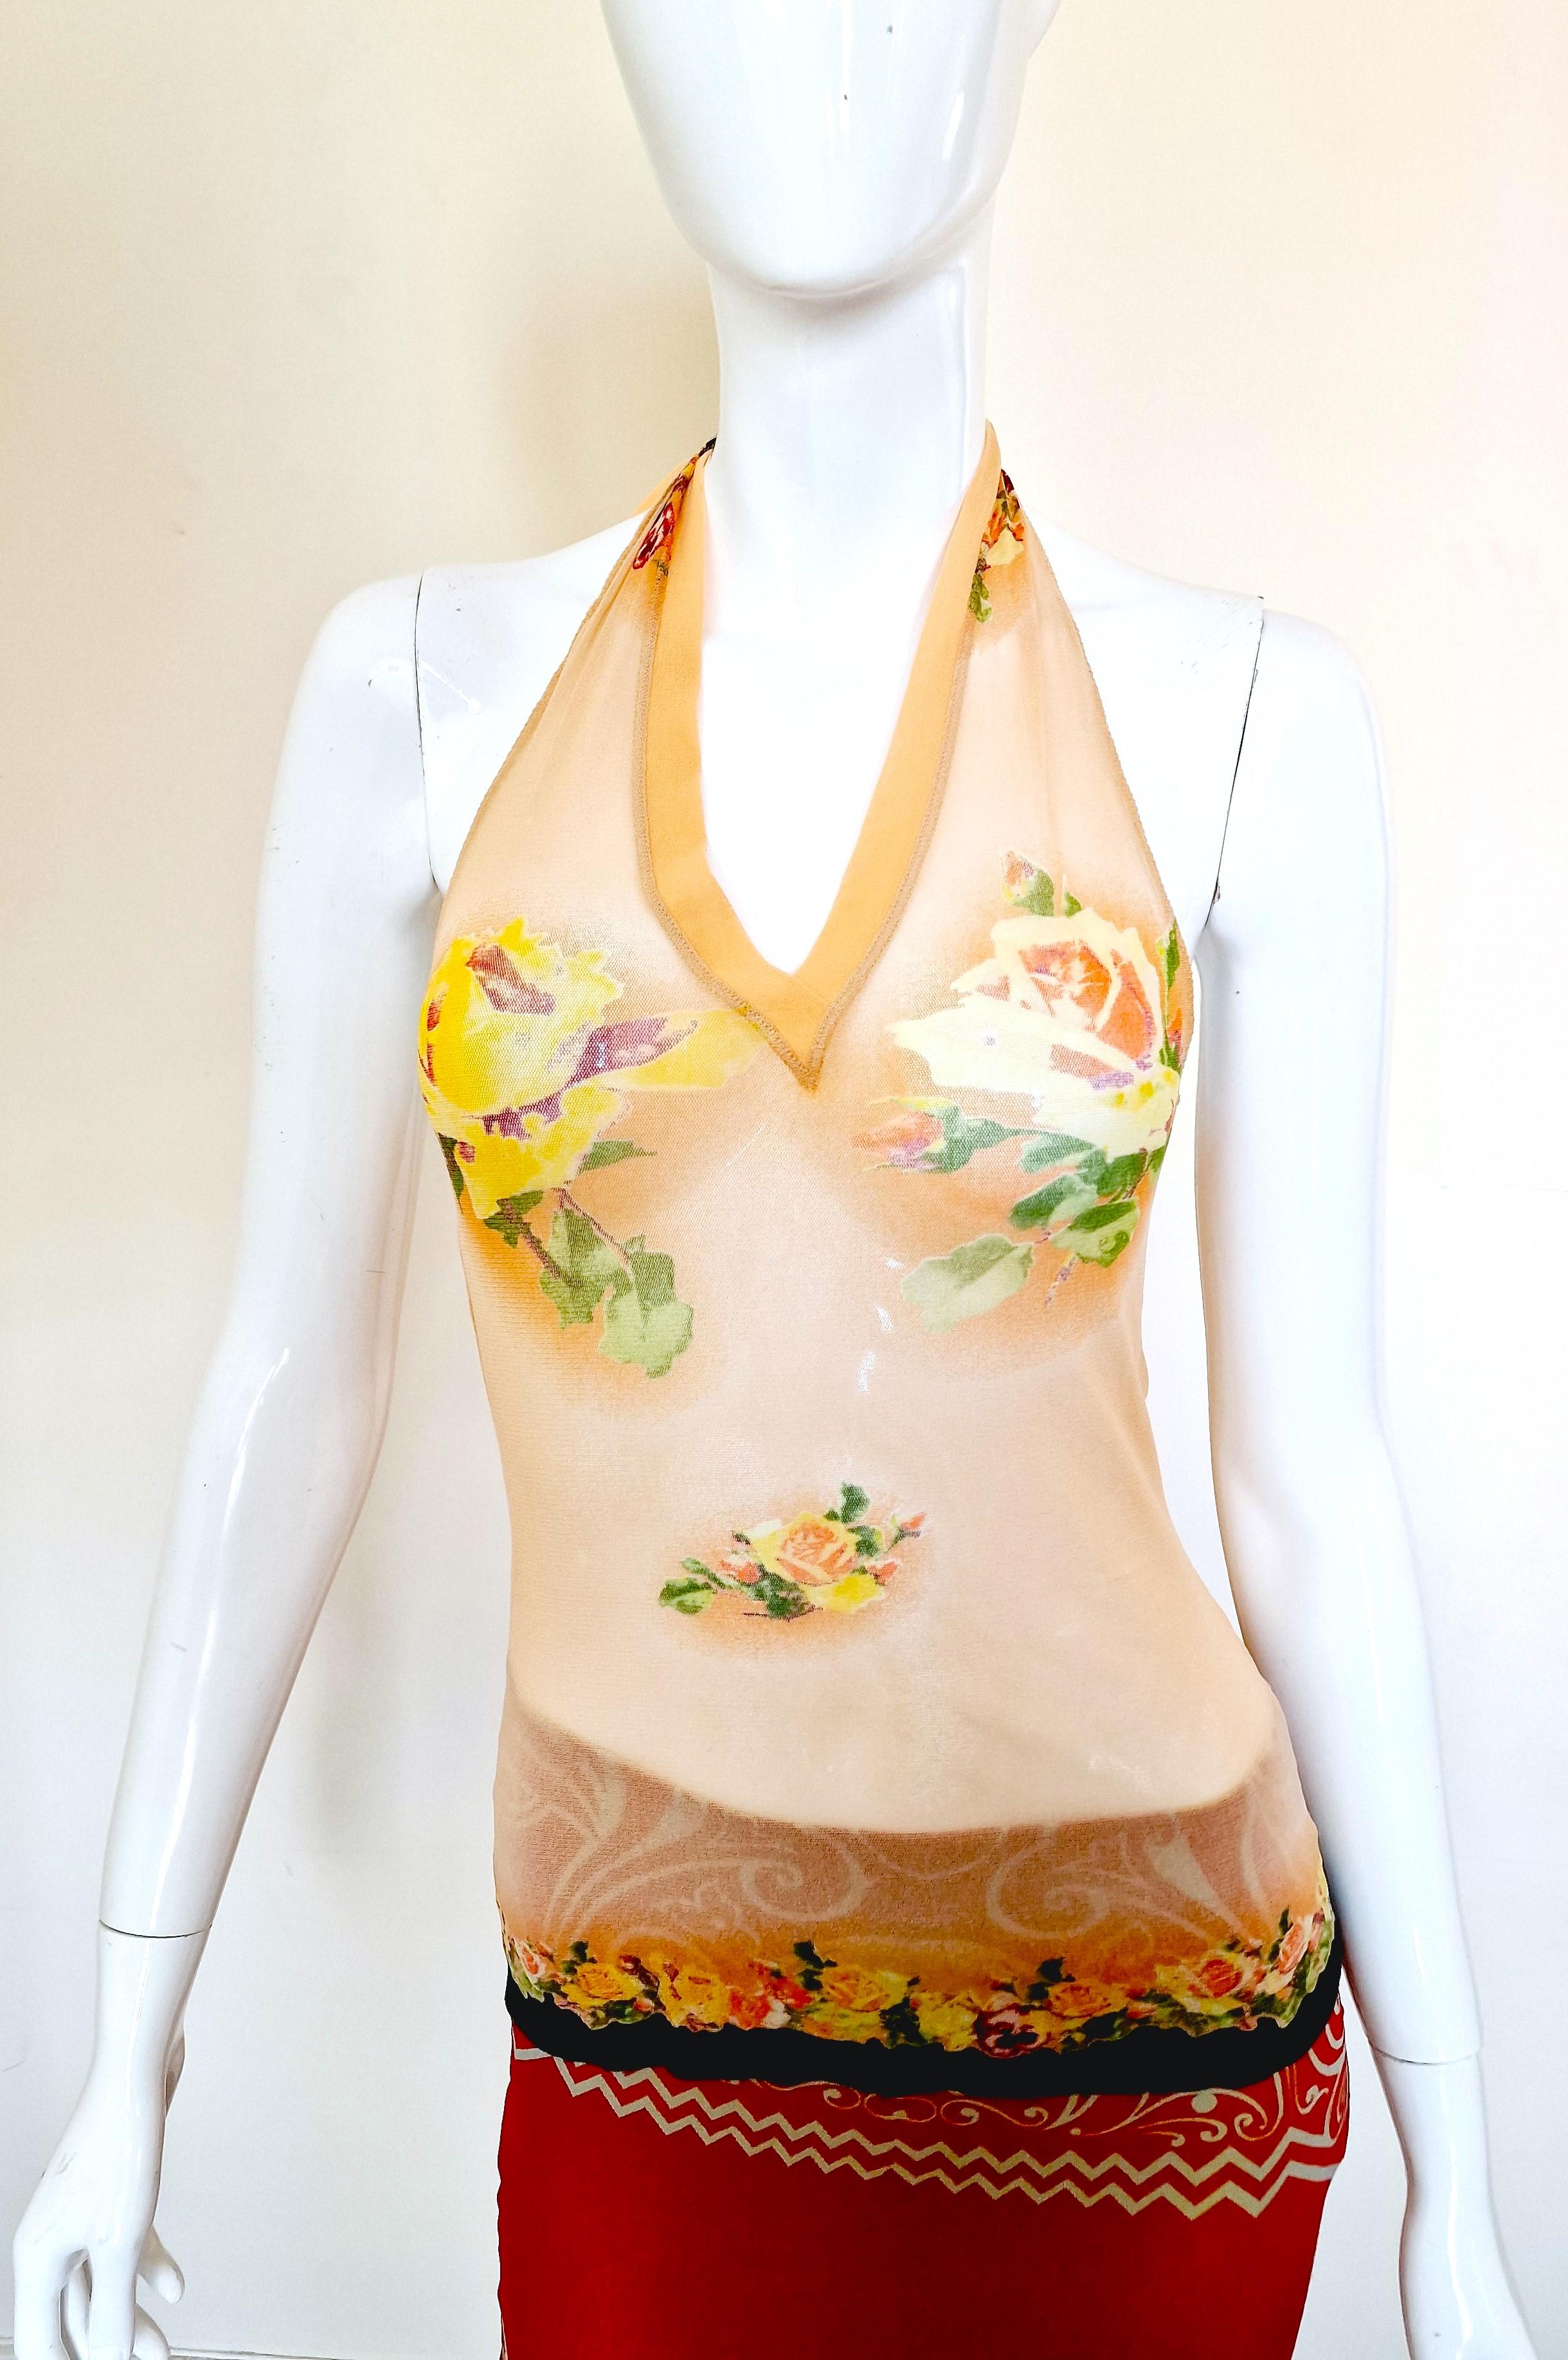 Floral tattoo mesh top by Jean Paul Gaultier!
This is the original collection which was tributed by Supreme.
The roses covers the breasts and the navel :)
The same pattern was worn by Kendall Jenner in Los Angeles, 2022 summer and Kylie Jenner in